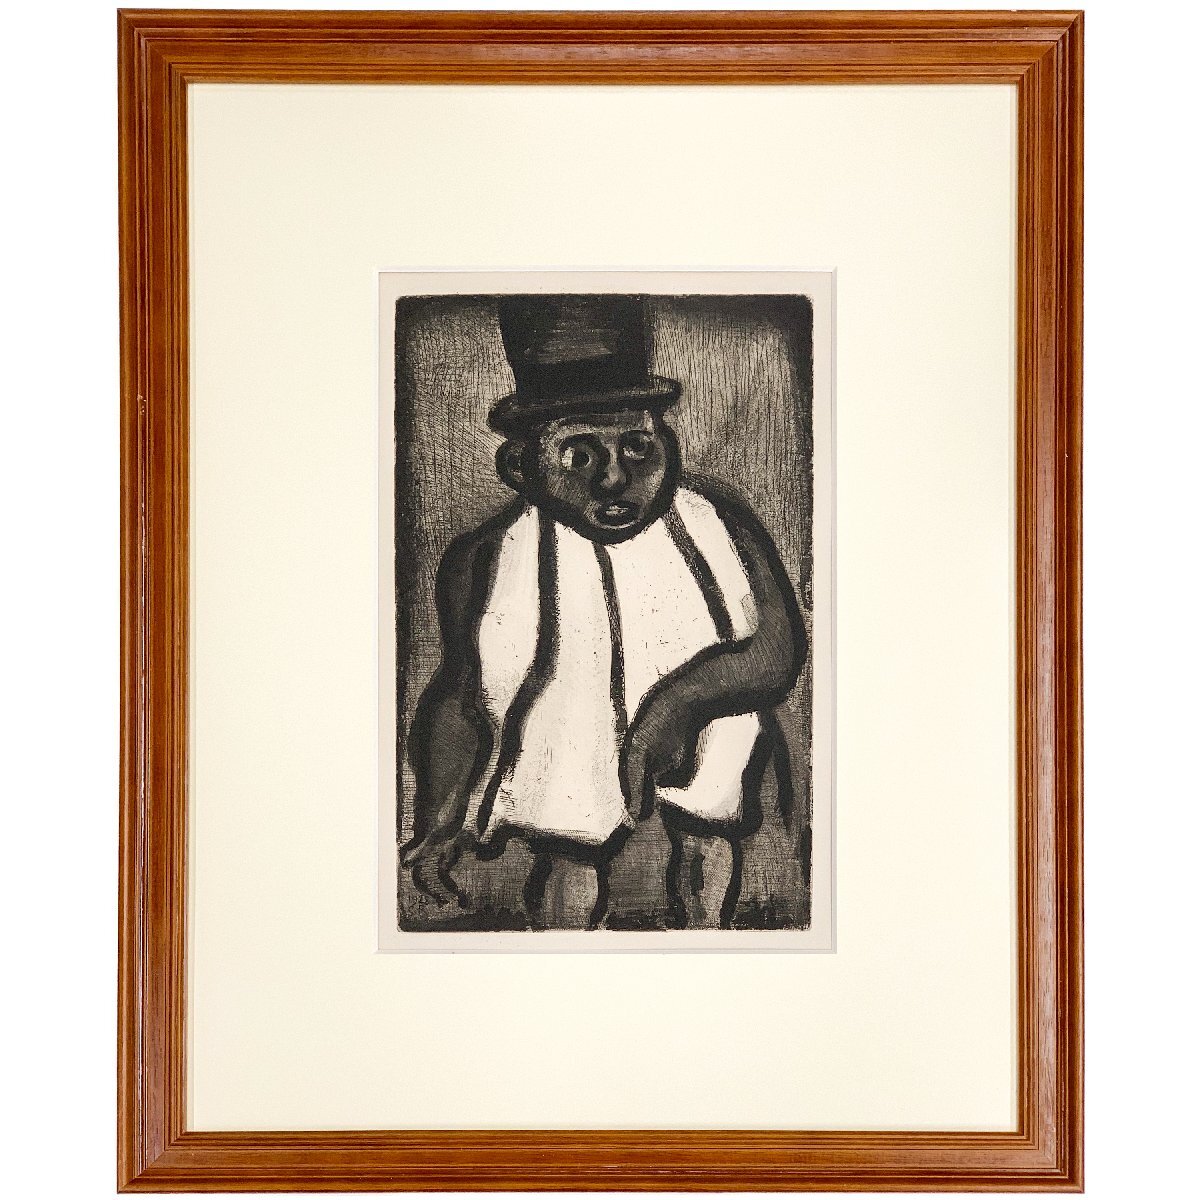 [SHIN] Georges Rouault Candidate Budubadabu (from The Rebirth of Old Ubu ) Copperplate print, framed Georges Rouault, Painting, Oil painting, others